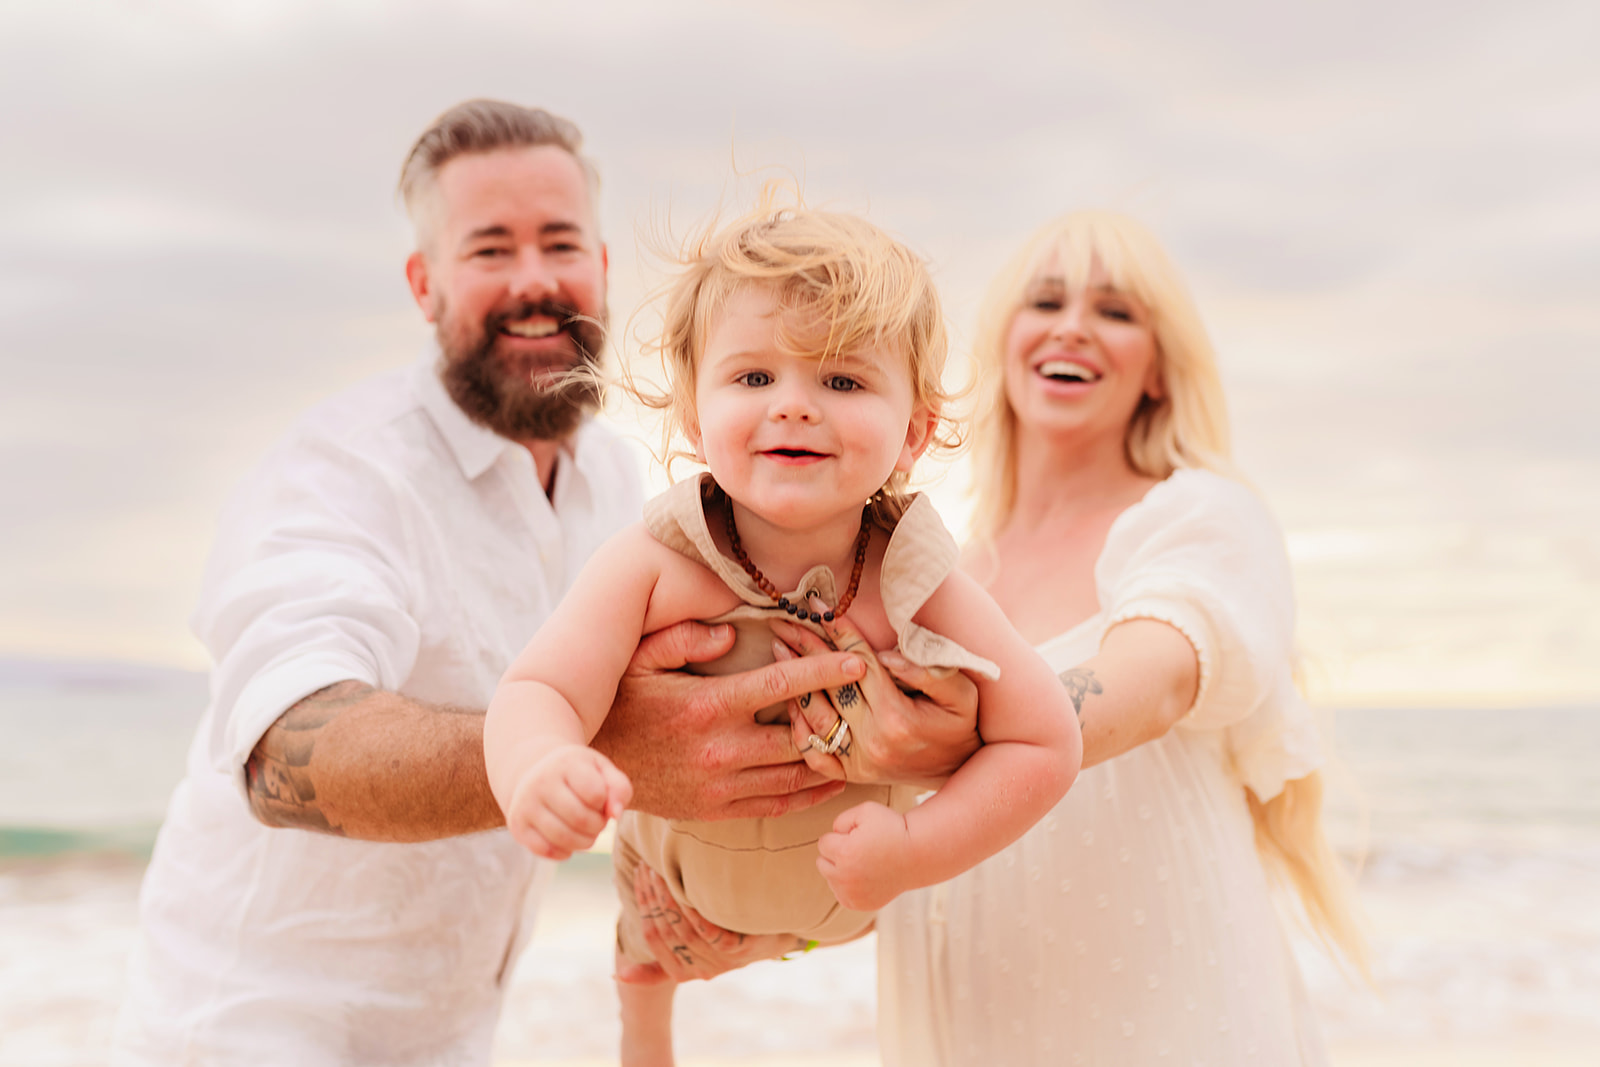 An adorable photoshoot with a toddler, his father, and pregnant mother for a family maternity photoshoot on Maui.